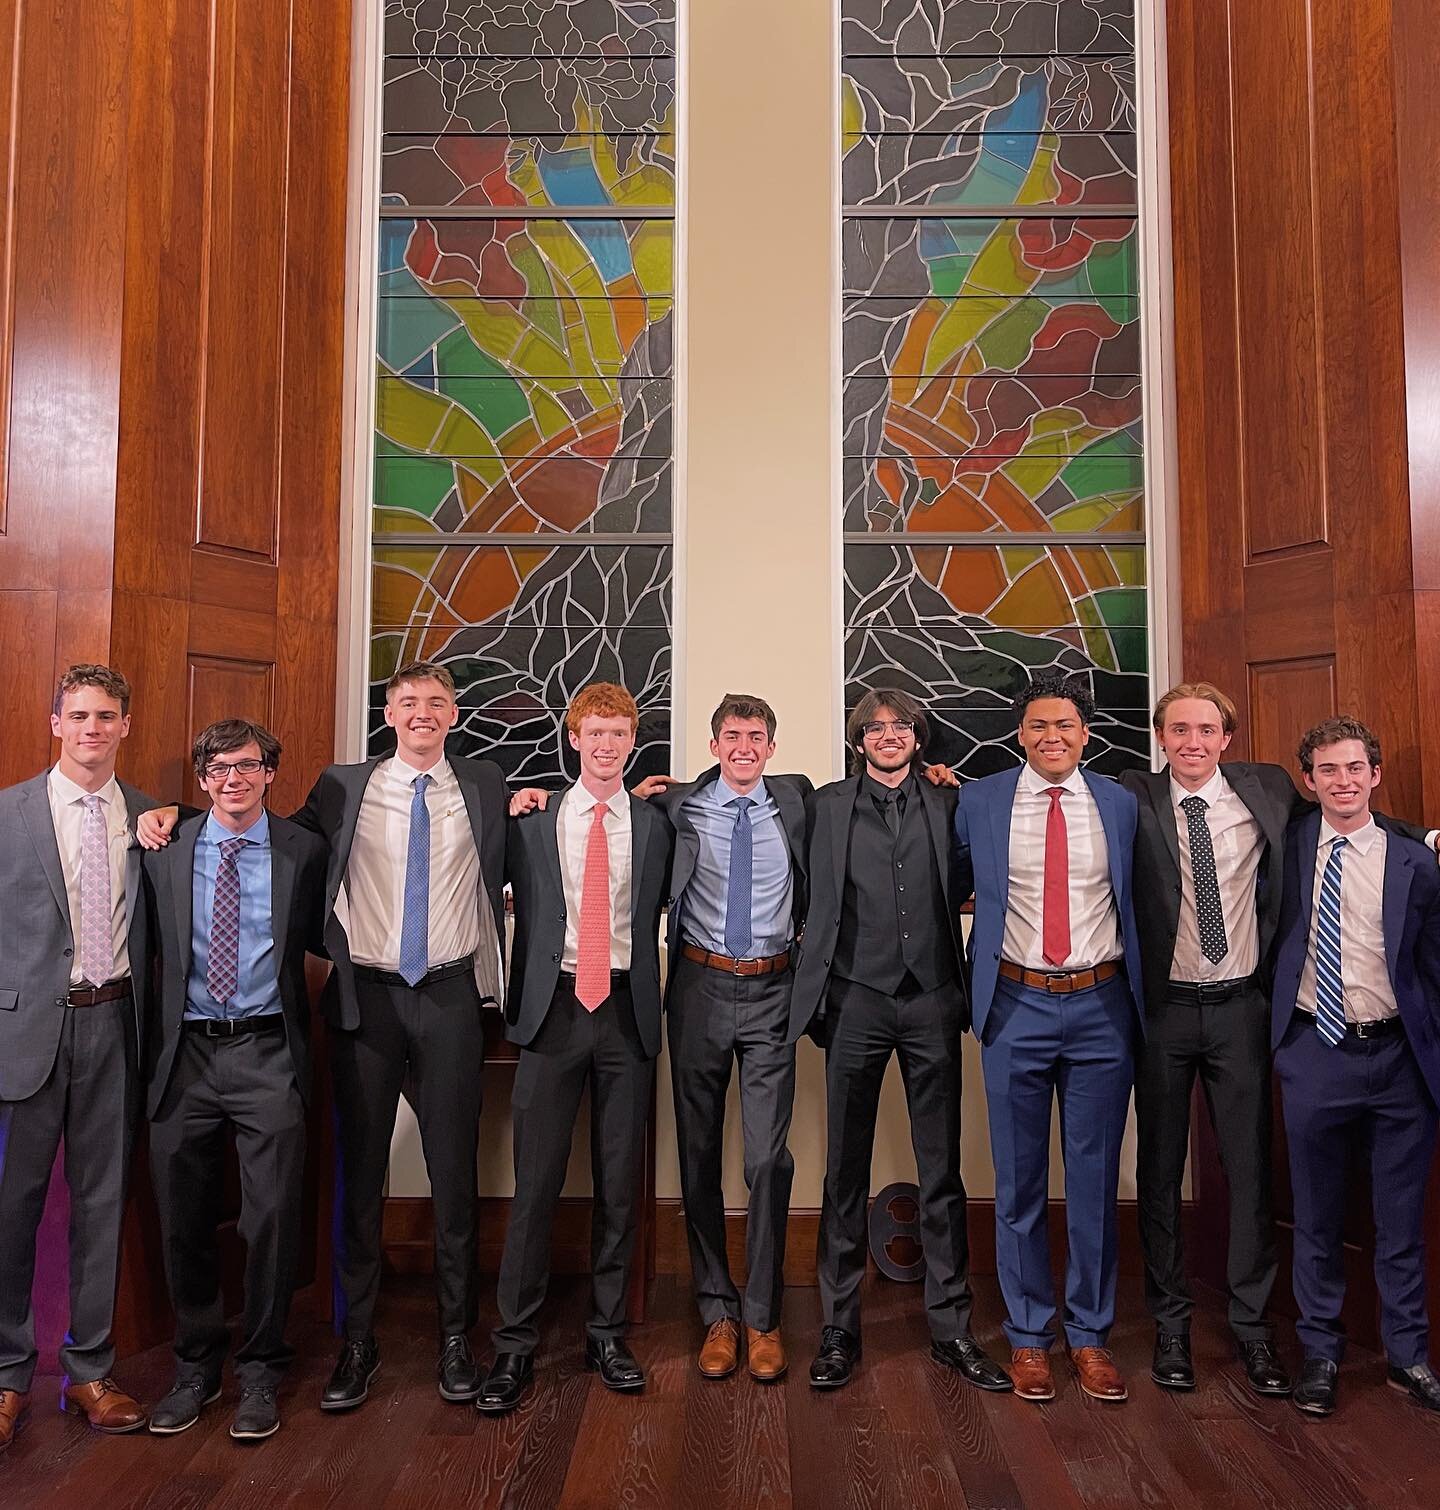 Yesterday evening we had the pleasure of initiating these fine gentleman into our chapter. We look forward to seeing what great things they have will accomplish through their time as members of the Delta Psi chapter of Beta Theta Pi. Welcome to the b